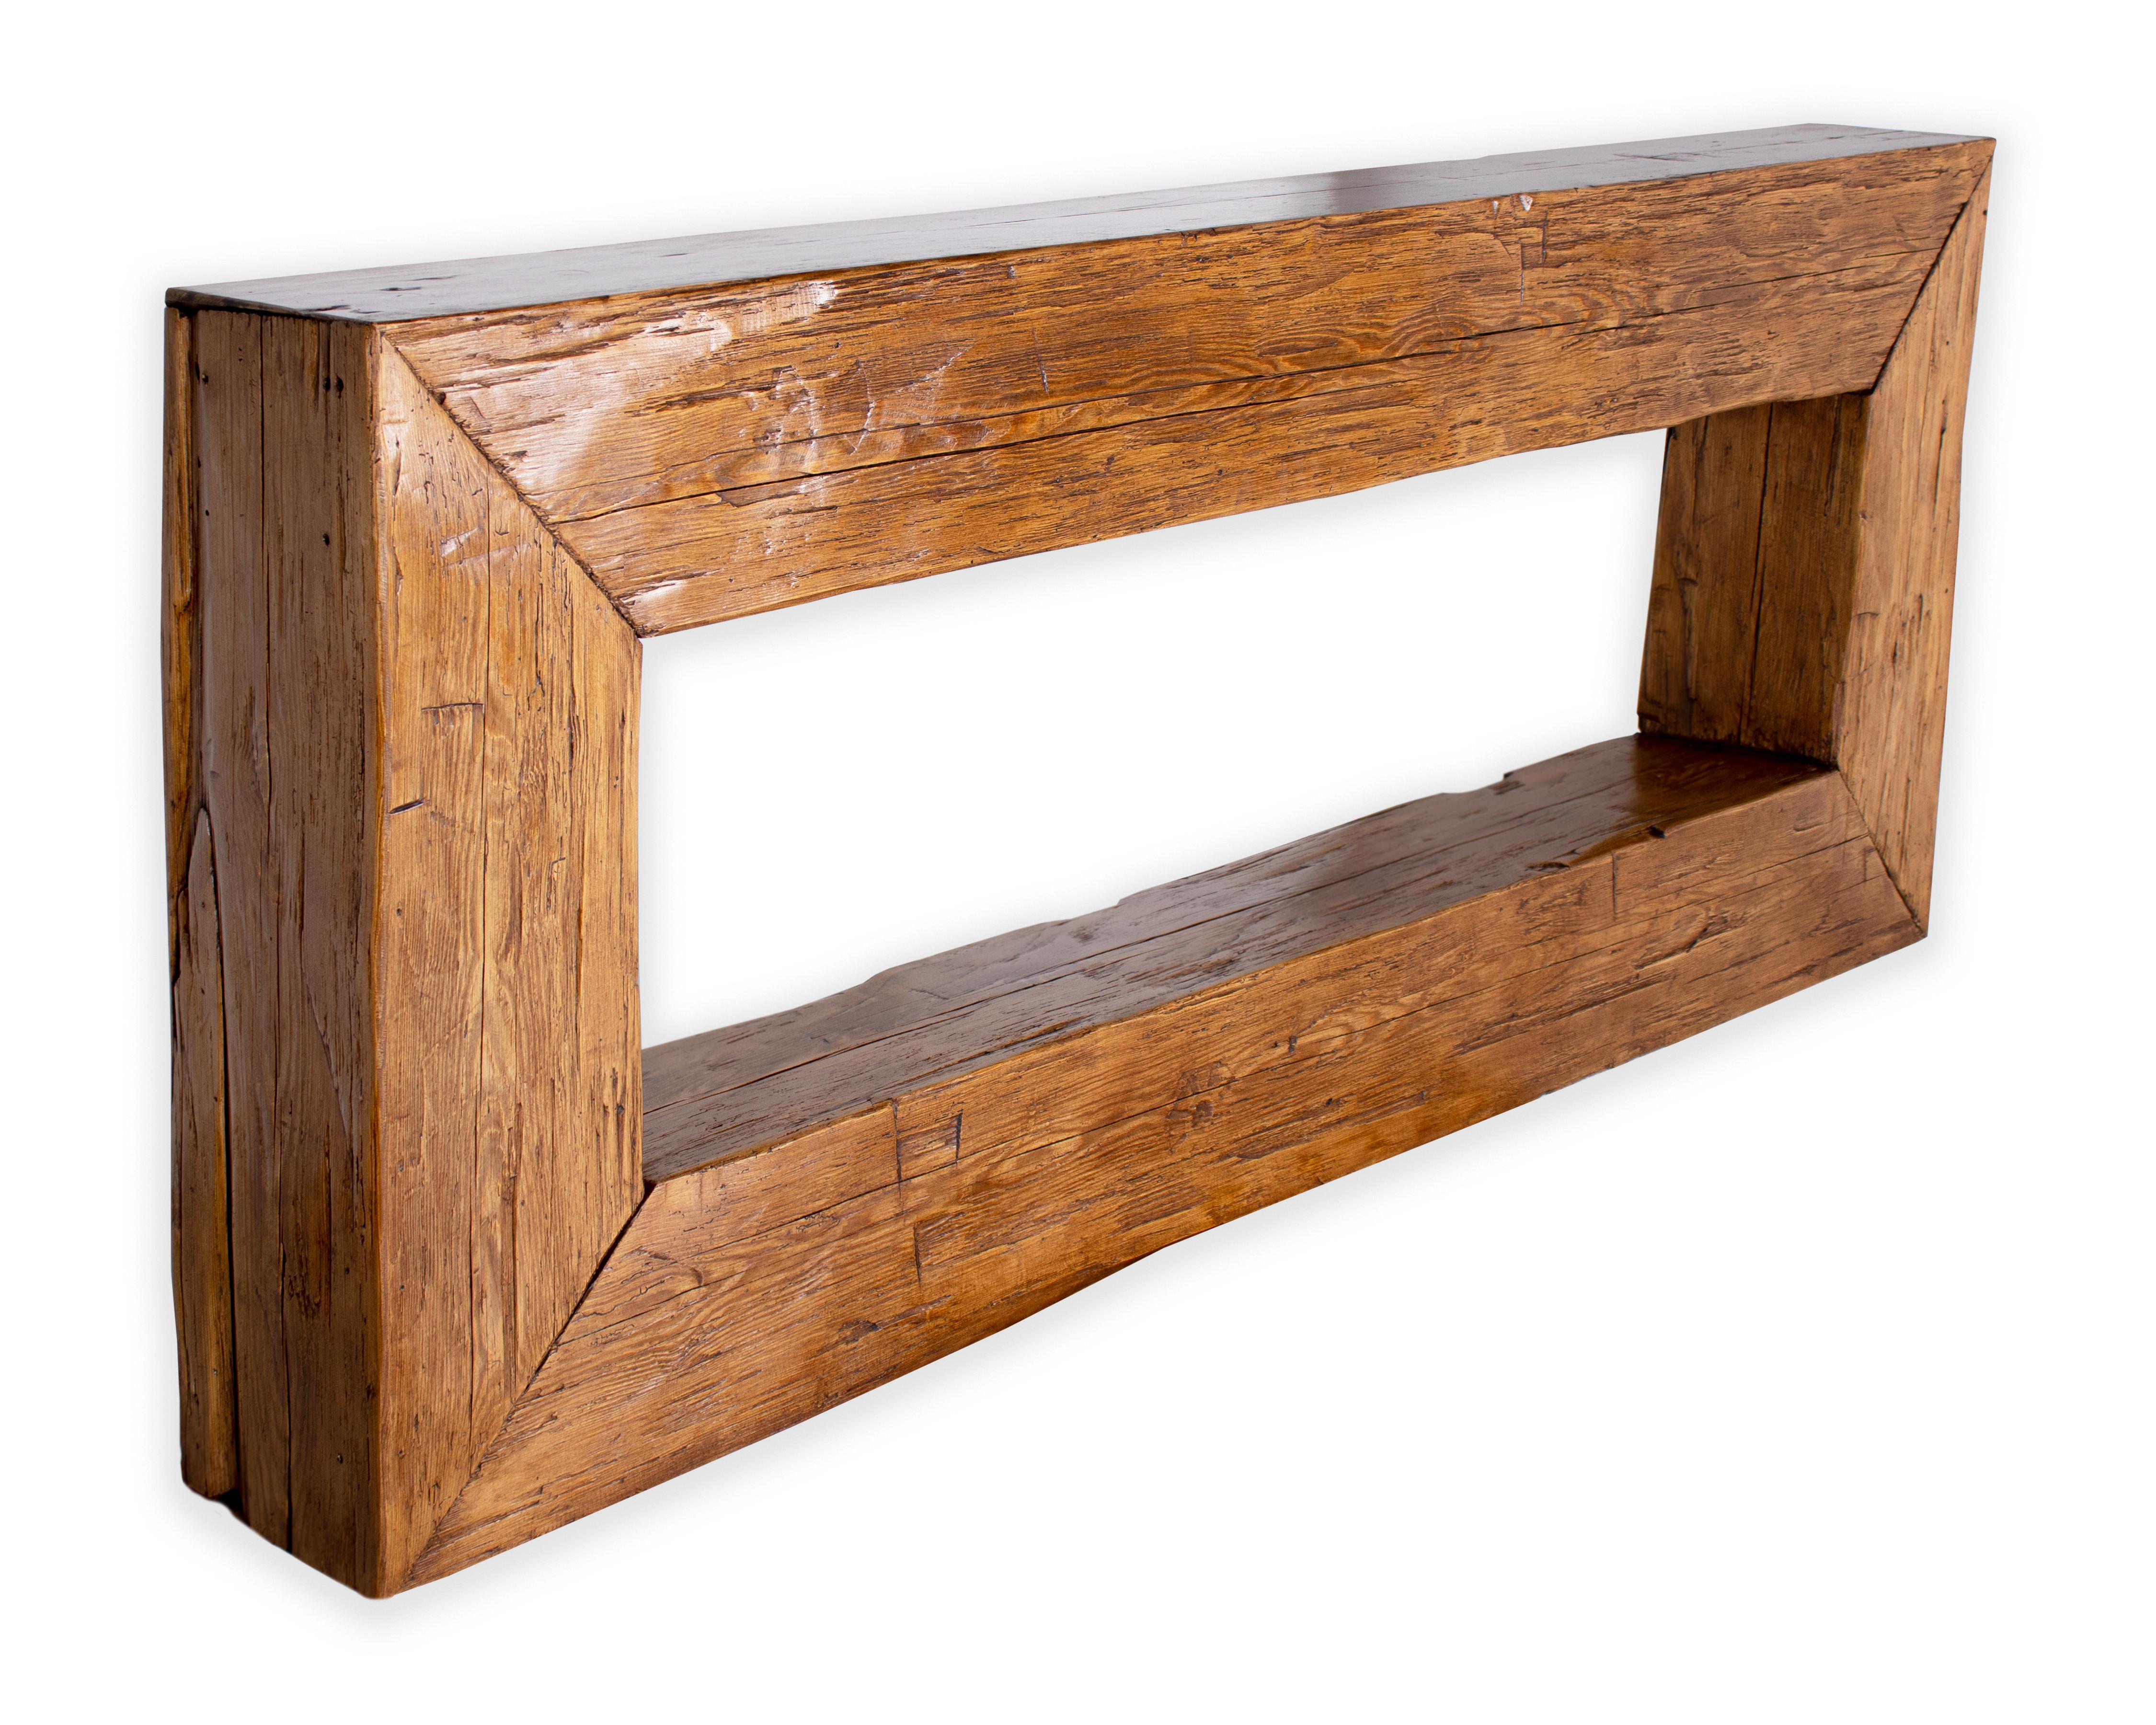 Wood architectural beam console table. Eastern North Carolina wax finish. In my organic, contemporary, vintage and mid-century modern aesthetic.

Part of our one of a kind Le Monde collection. Exclusive to Brendan Bass.